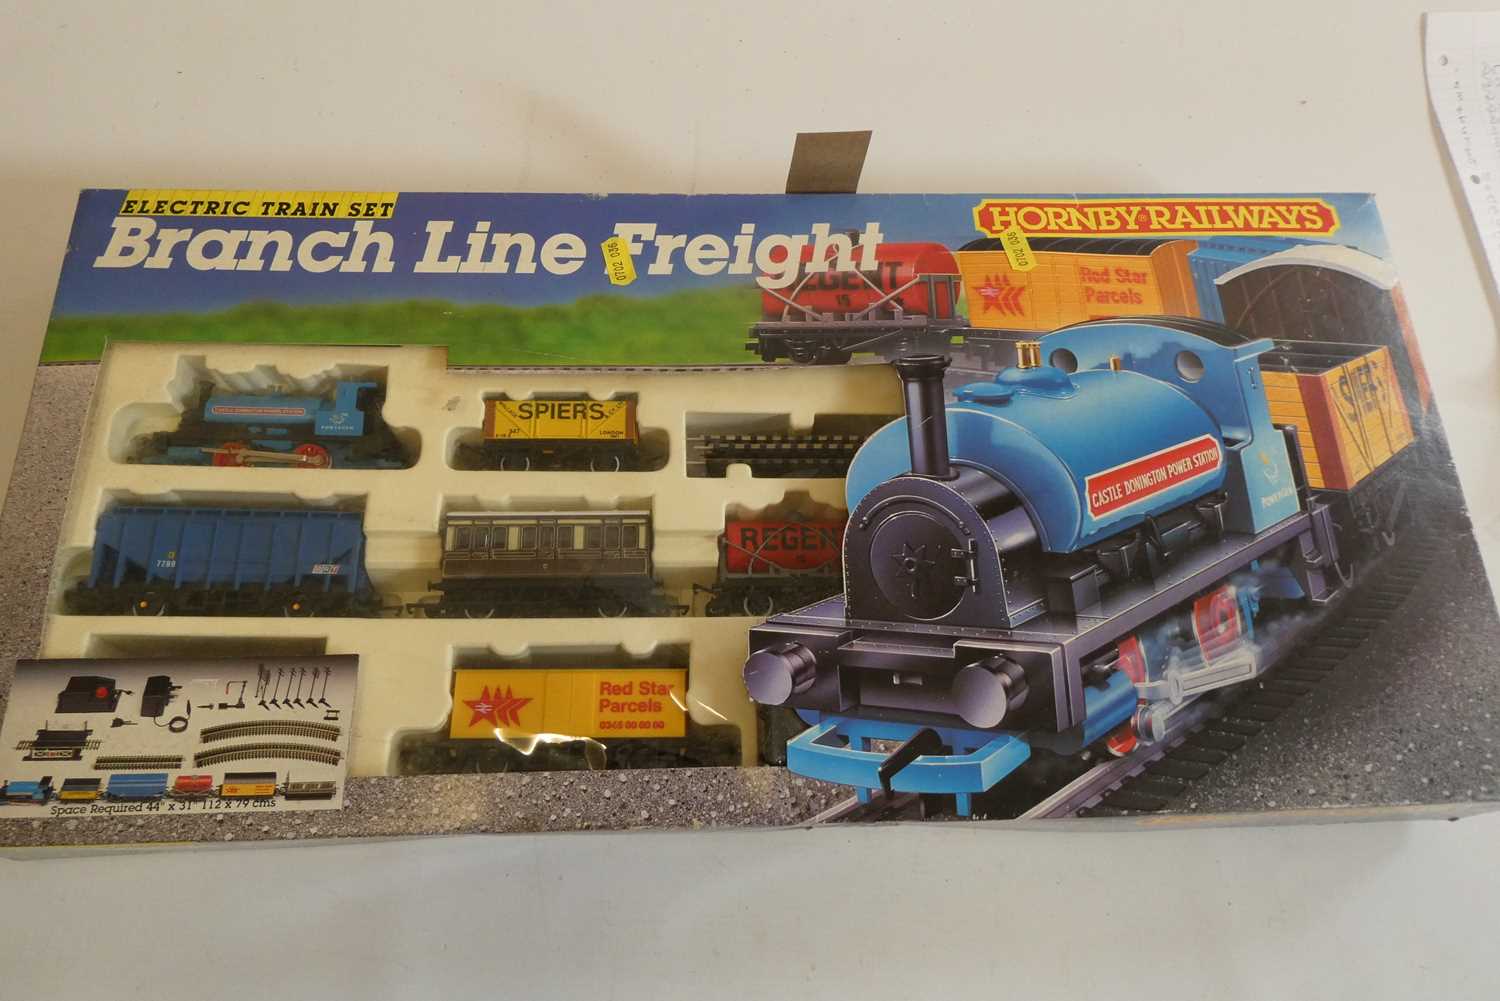 Hornby Railways Branchline Freight Train Set, boxed, good to excellent